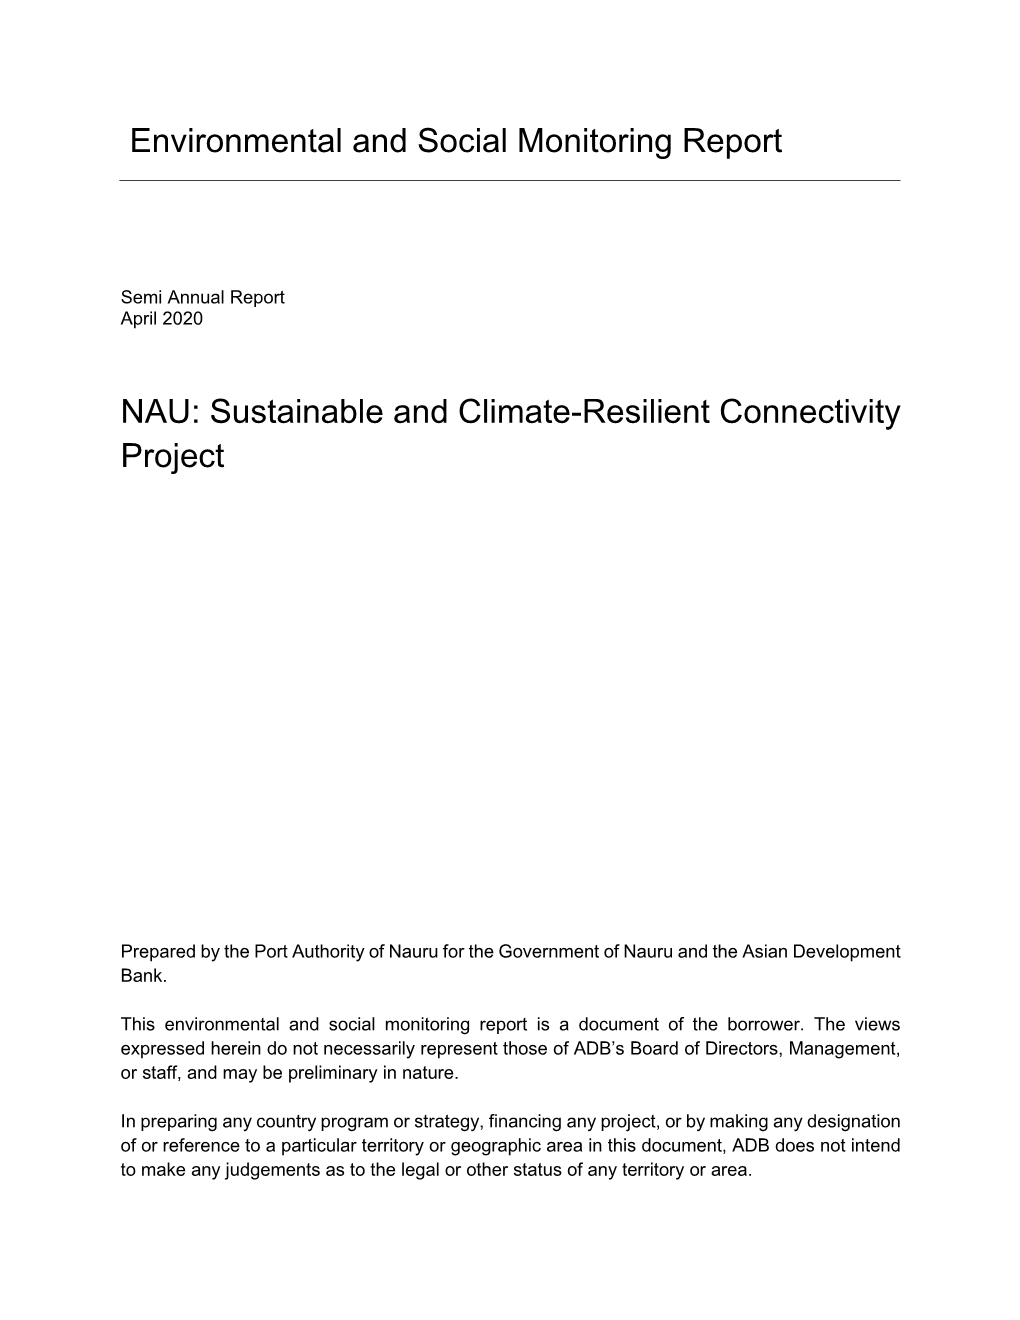 NAU: Sustainable and Climate-Resilient Connectivity Project